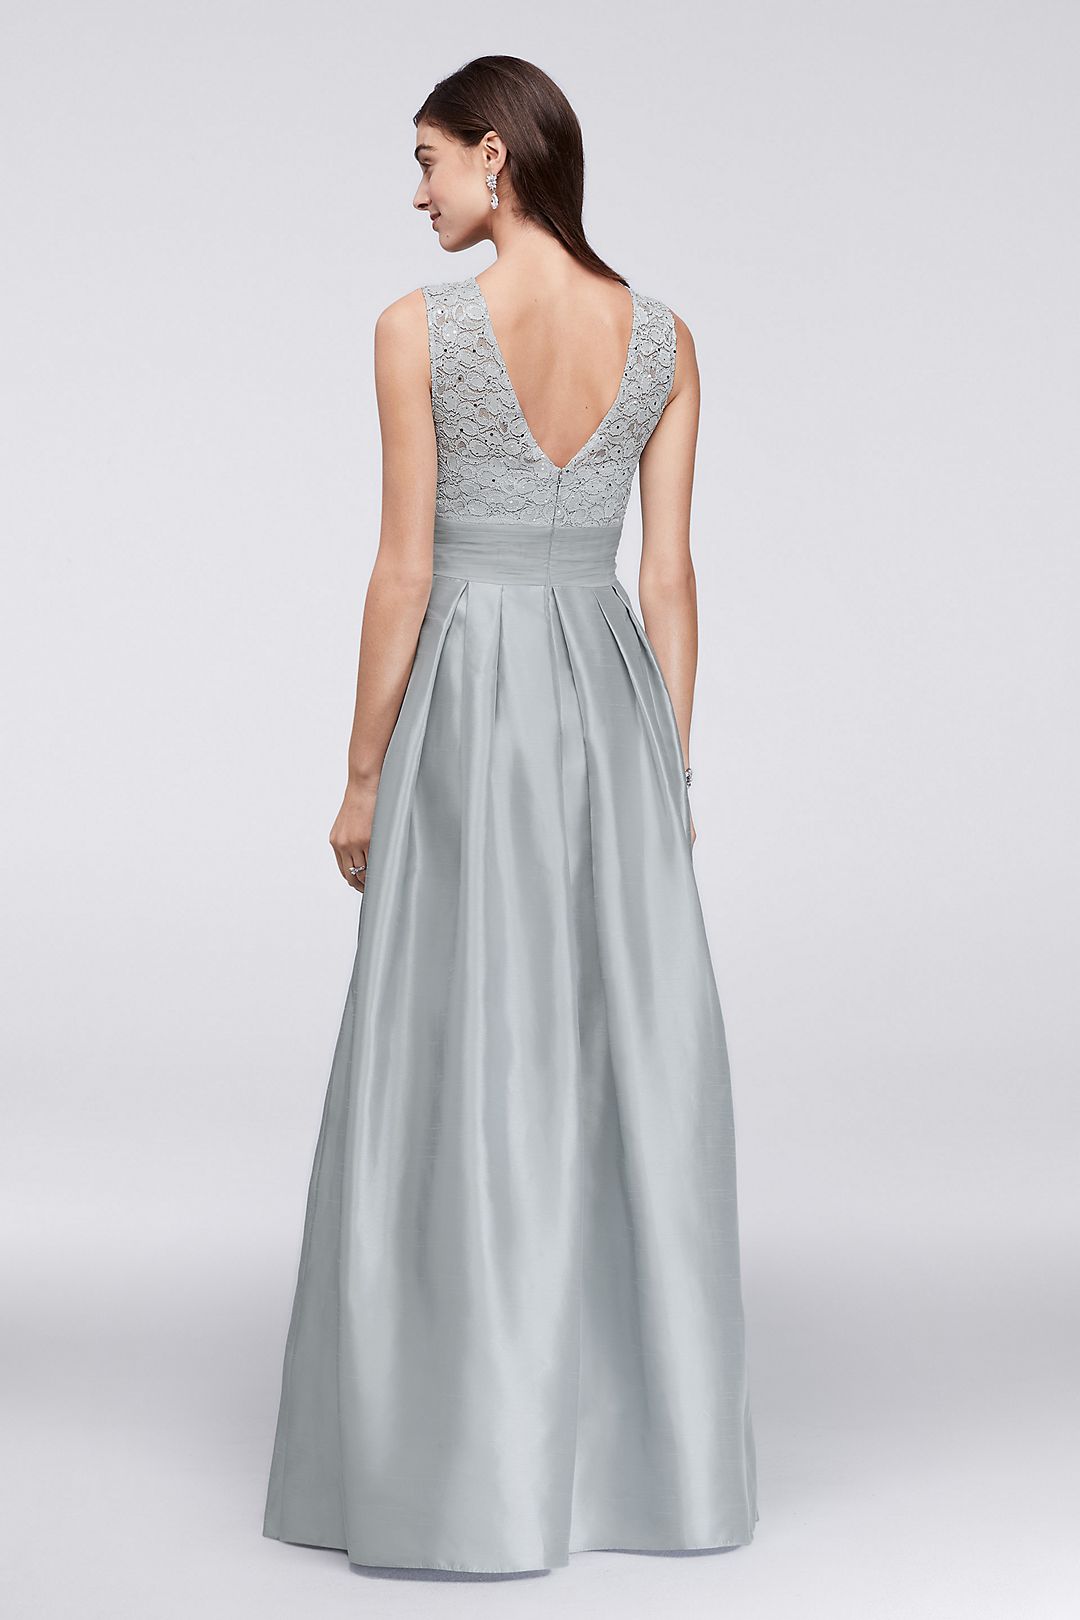 Lace and Satin Sleeveless Ball Gown Image 4